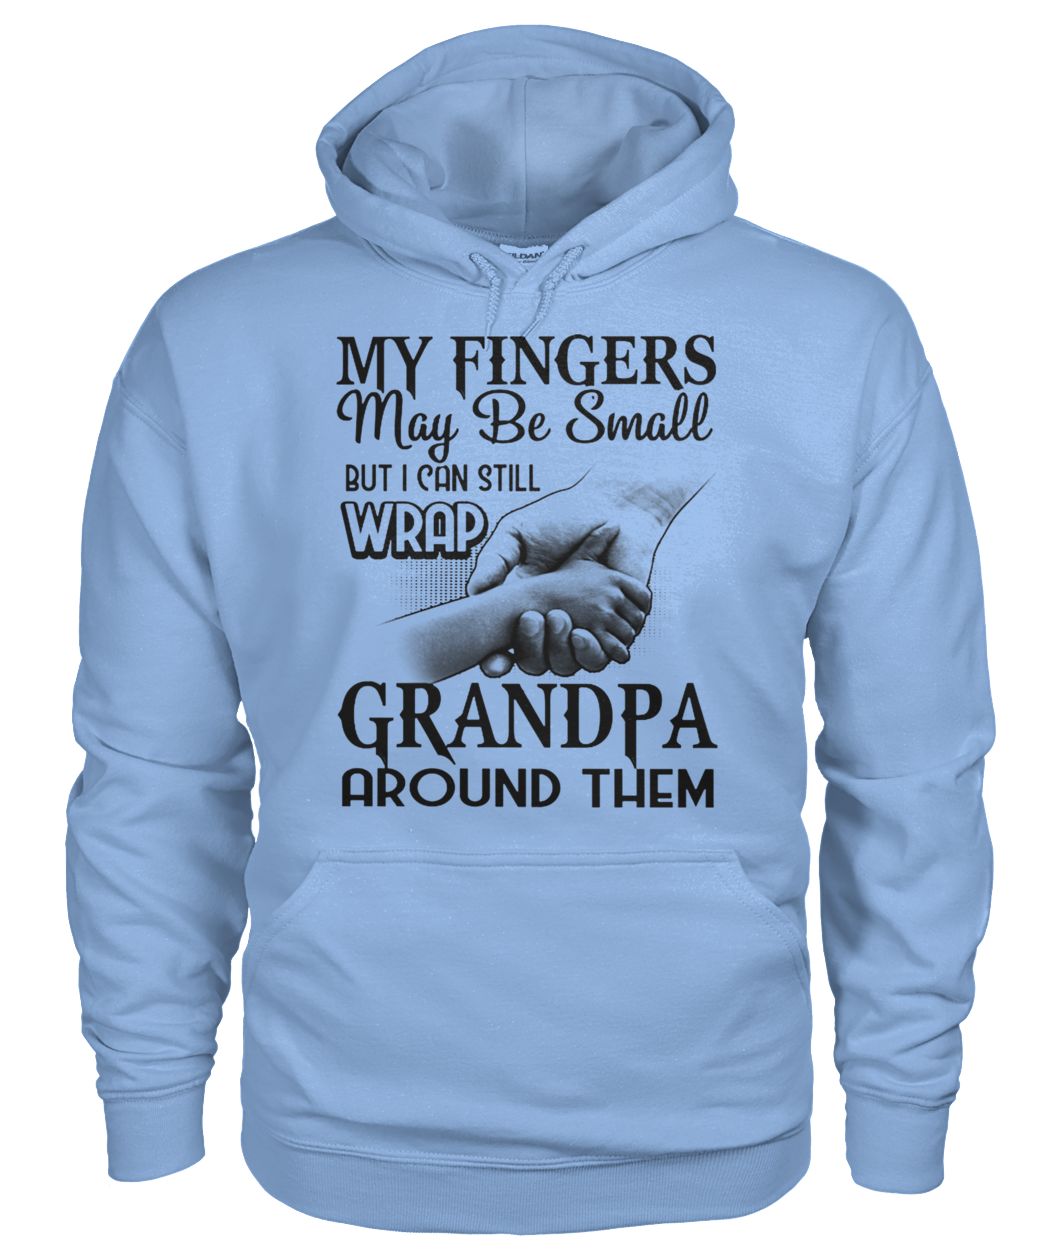 My fingers may be small but I can still wrap grandpa around them gildan hoodie